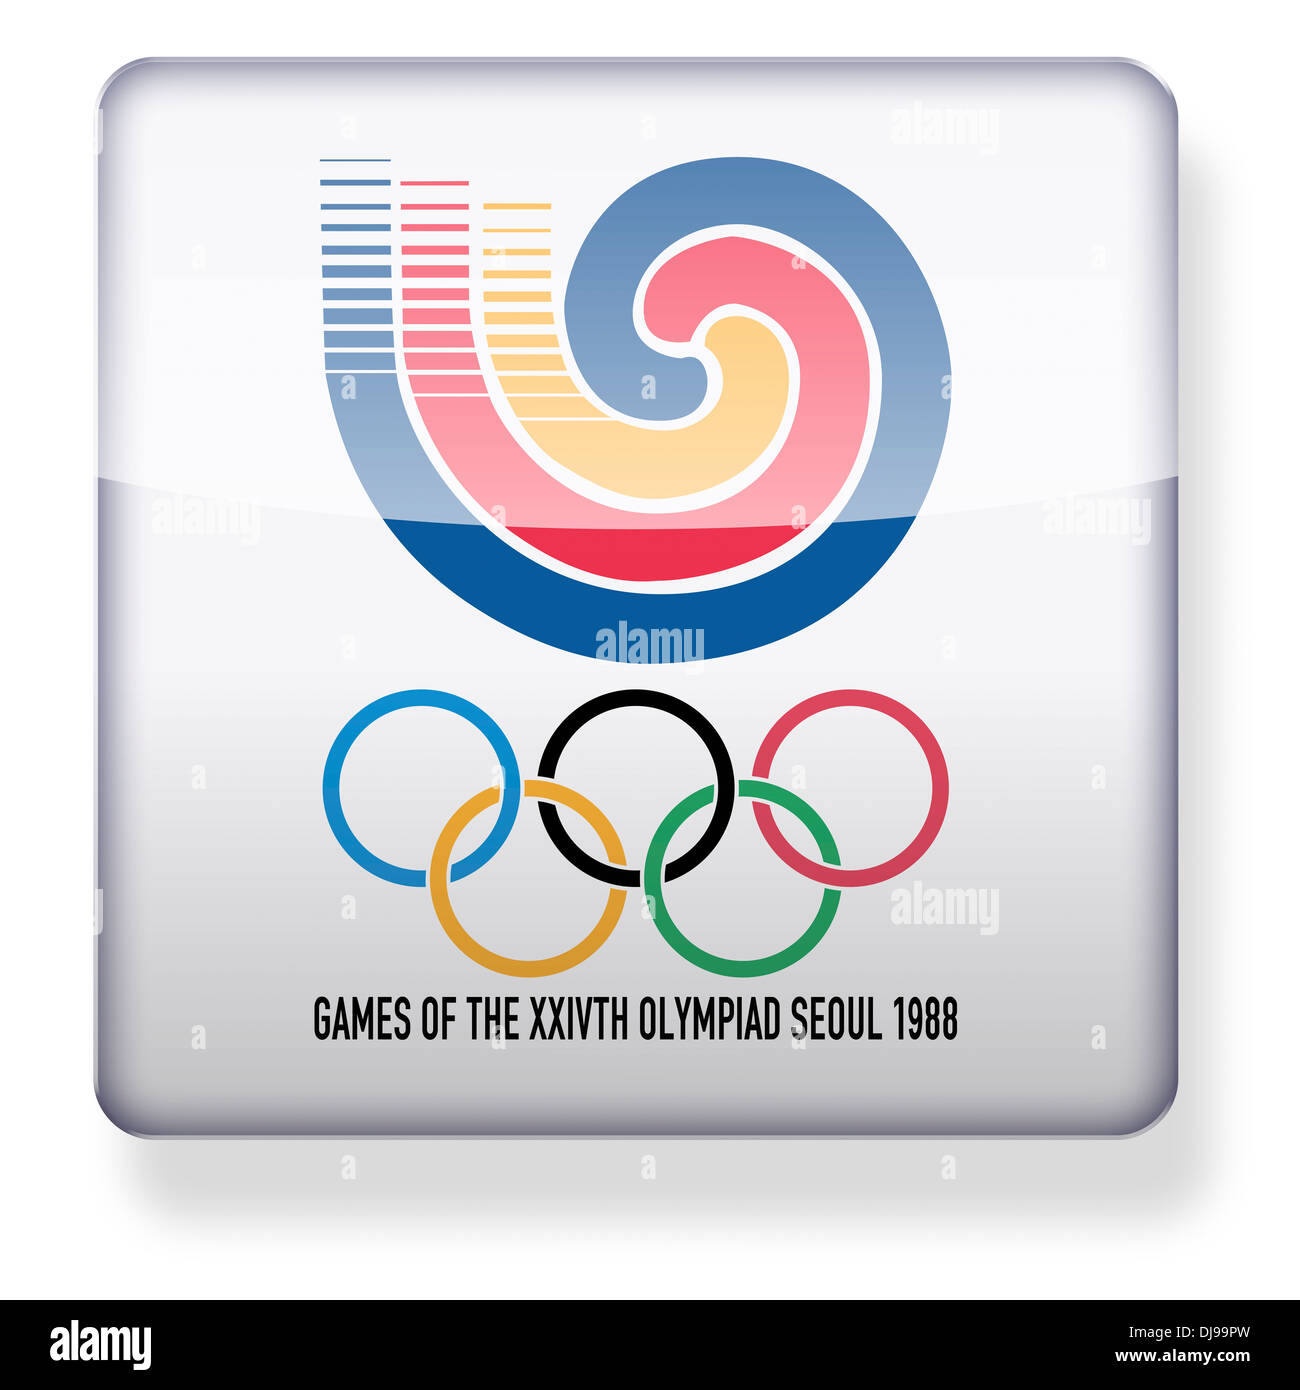 Seoul 1988 Olympics logo as an app icon. Clipping path included. Stock Photo